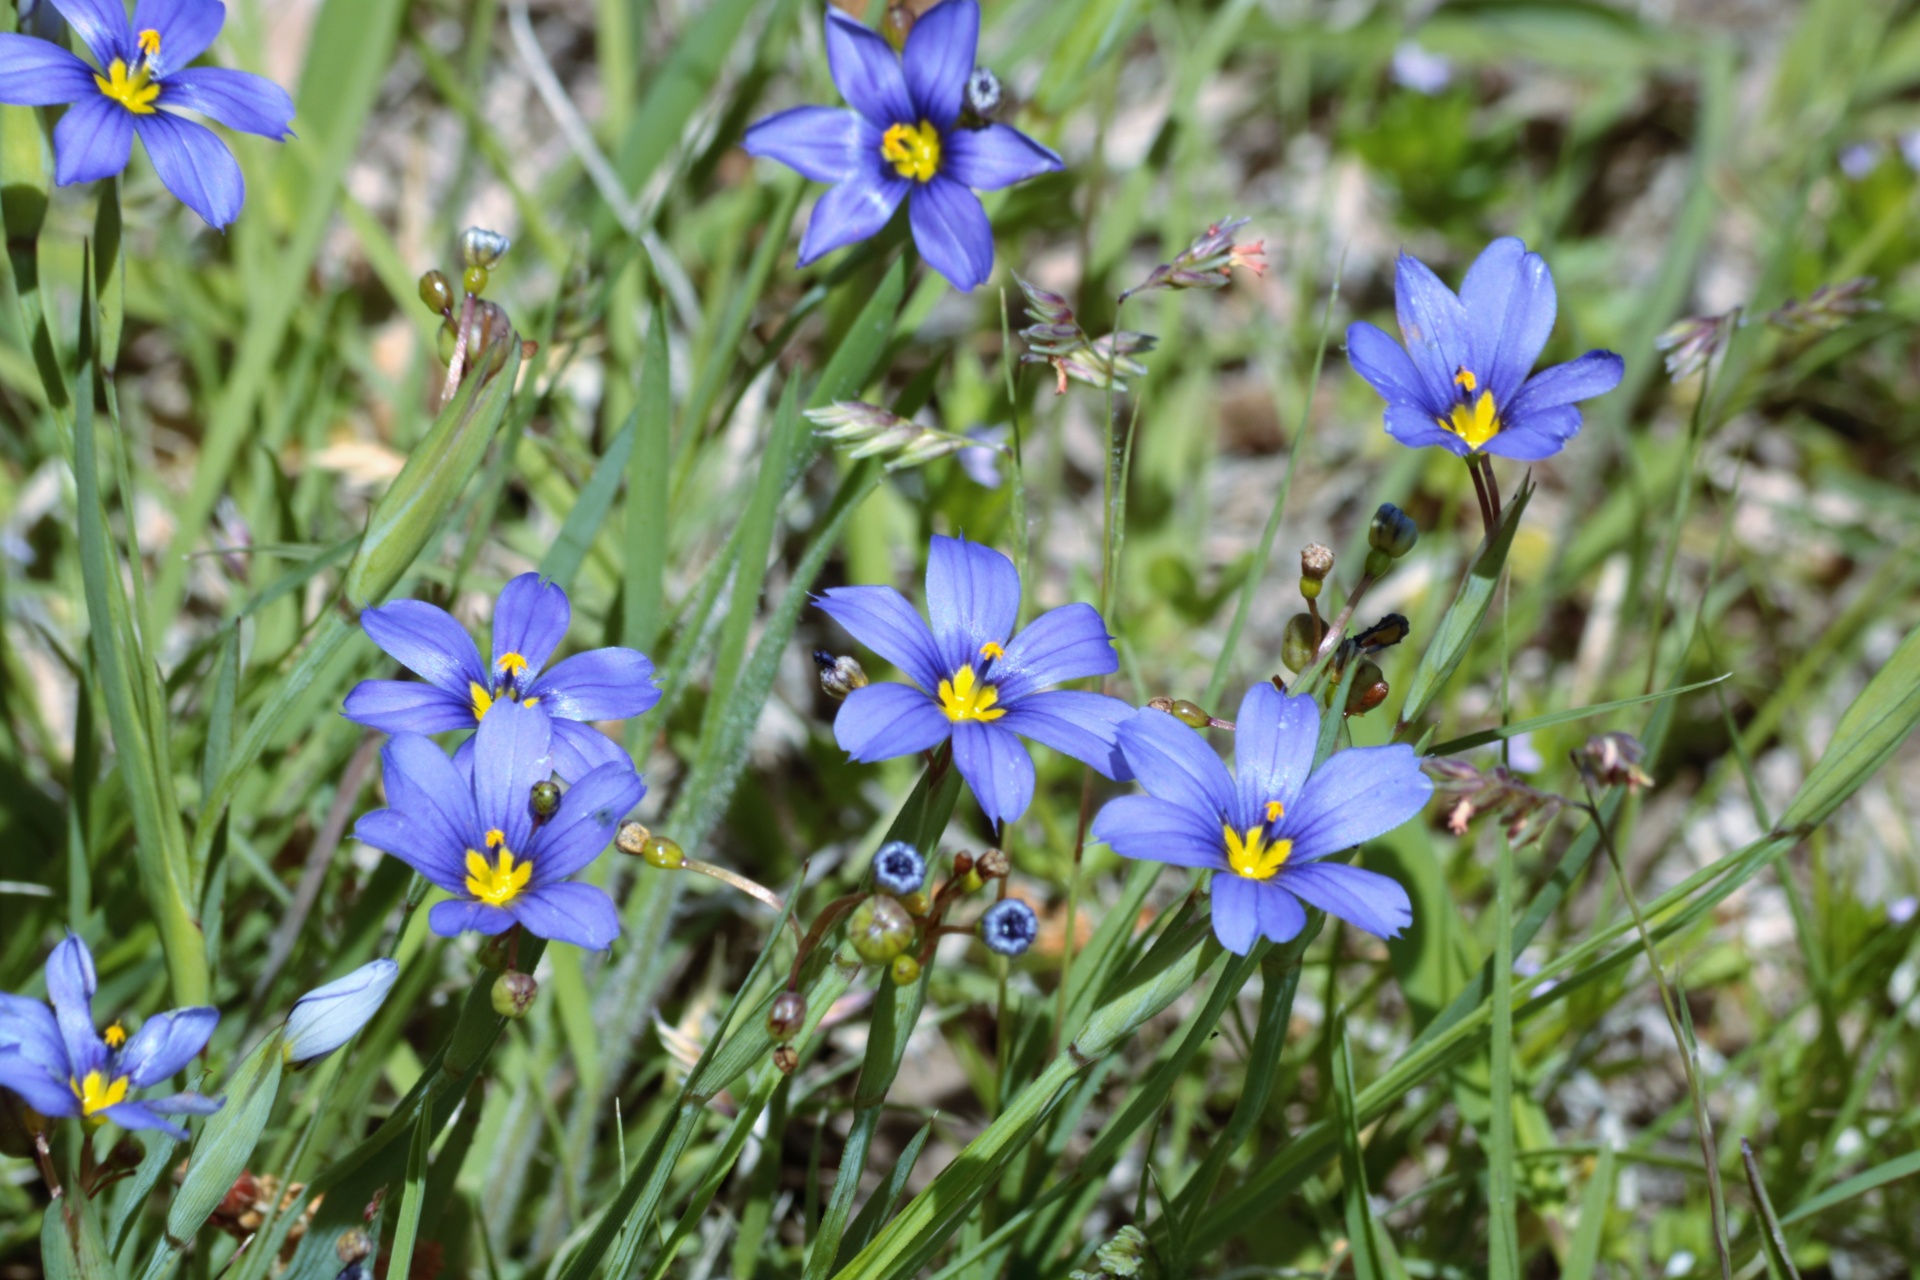 Close-up of the beautiful blue blooms of the blue-eyed grass wildflowers in an Oklahoma country field.